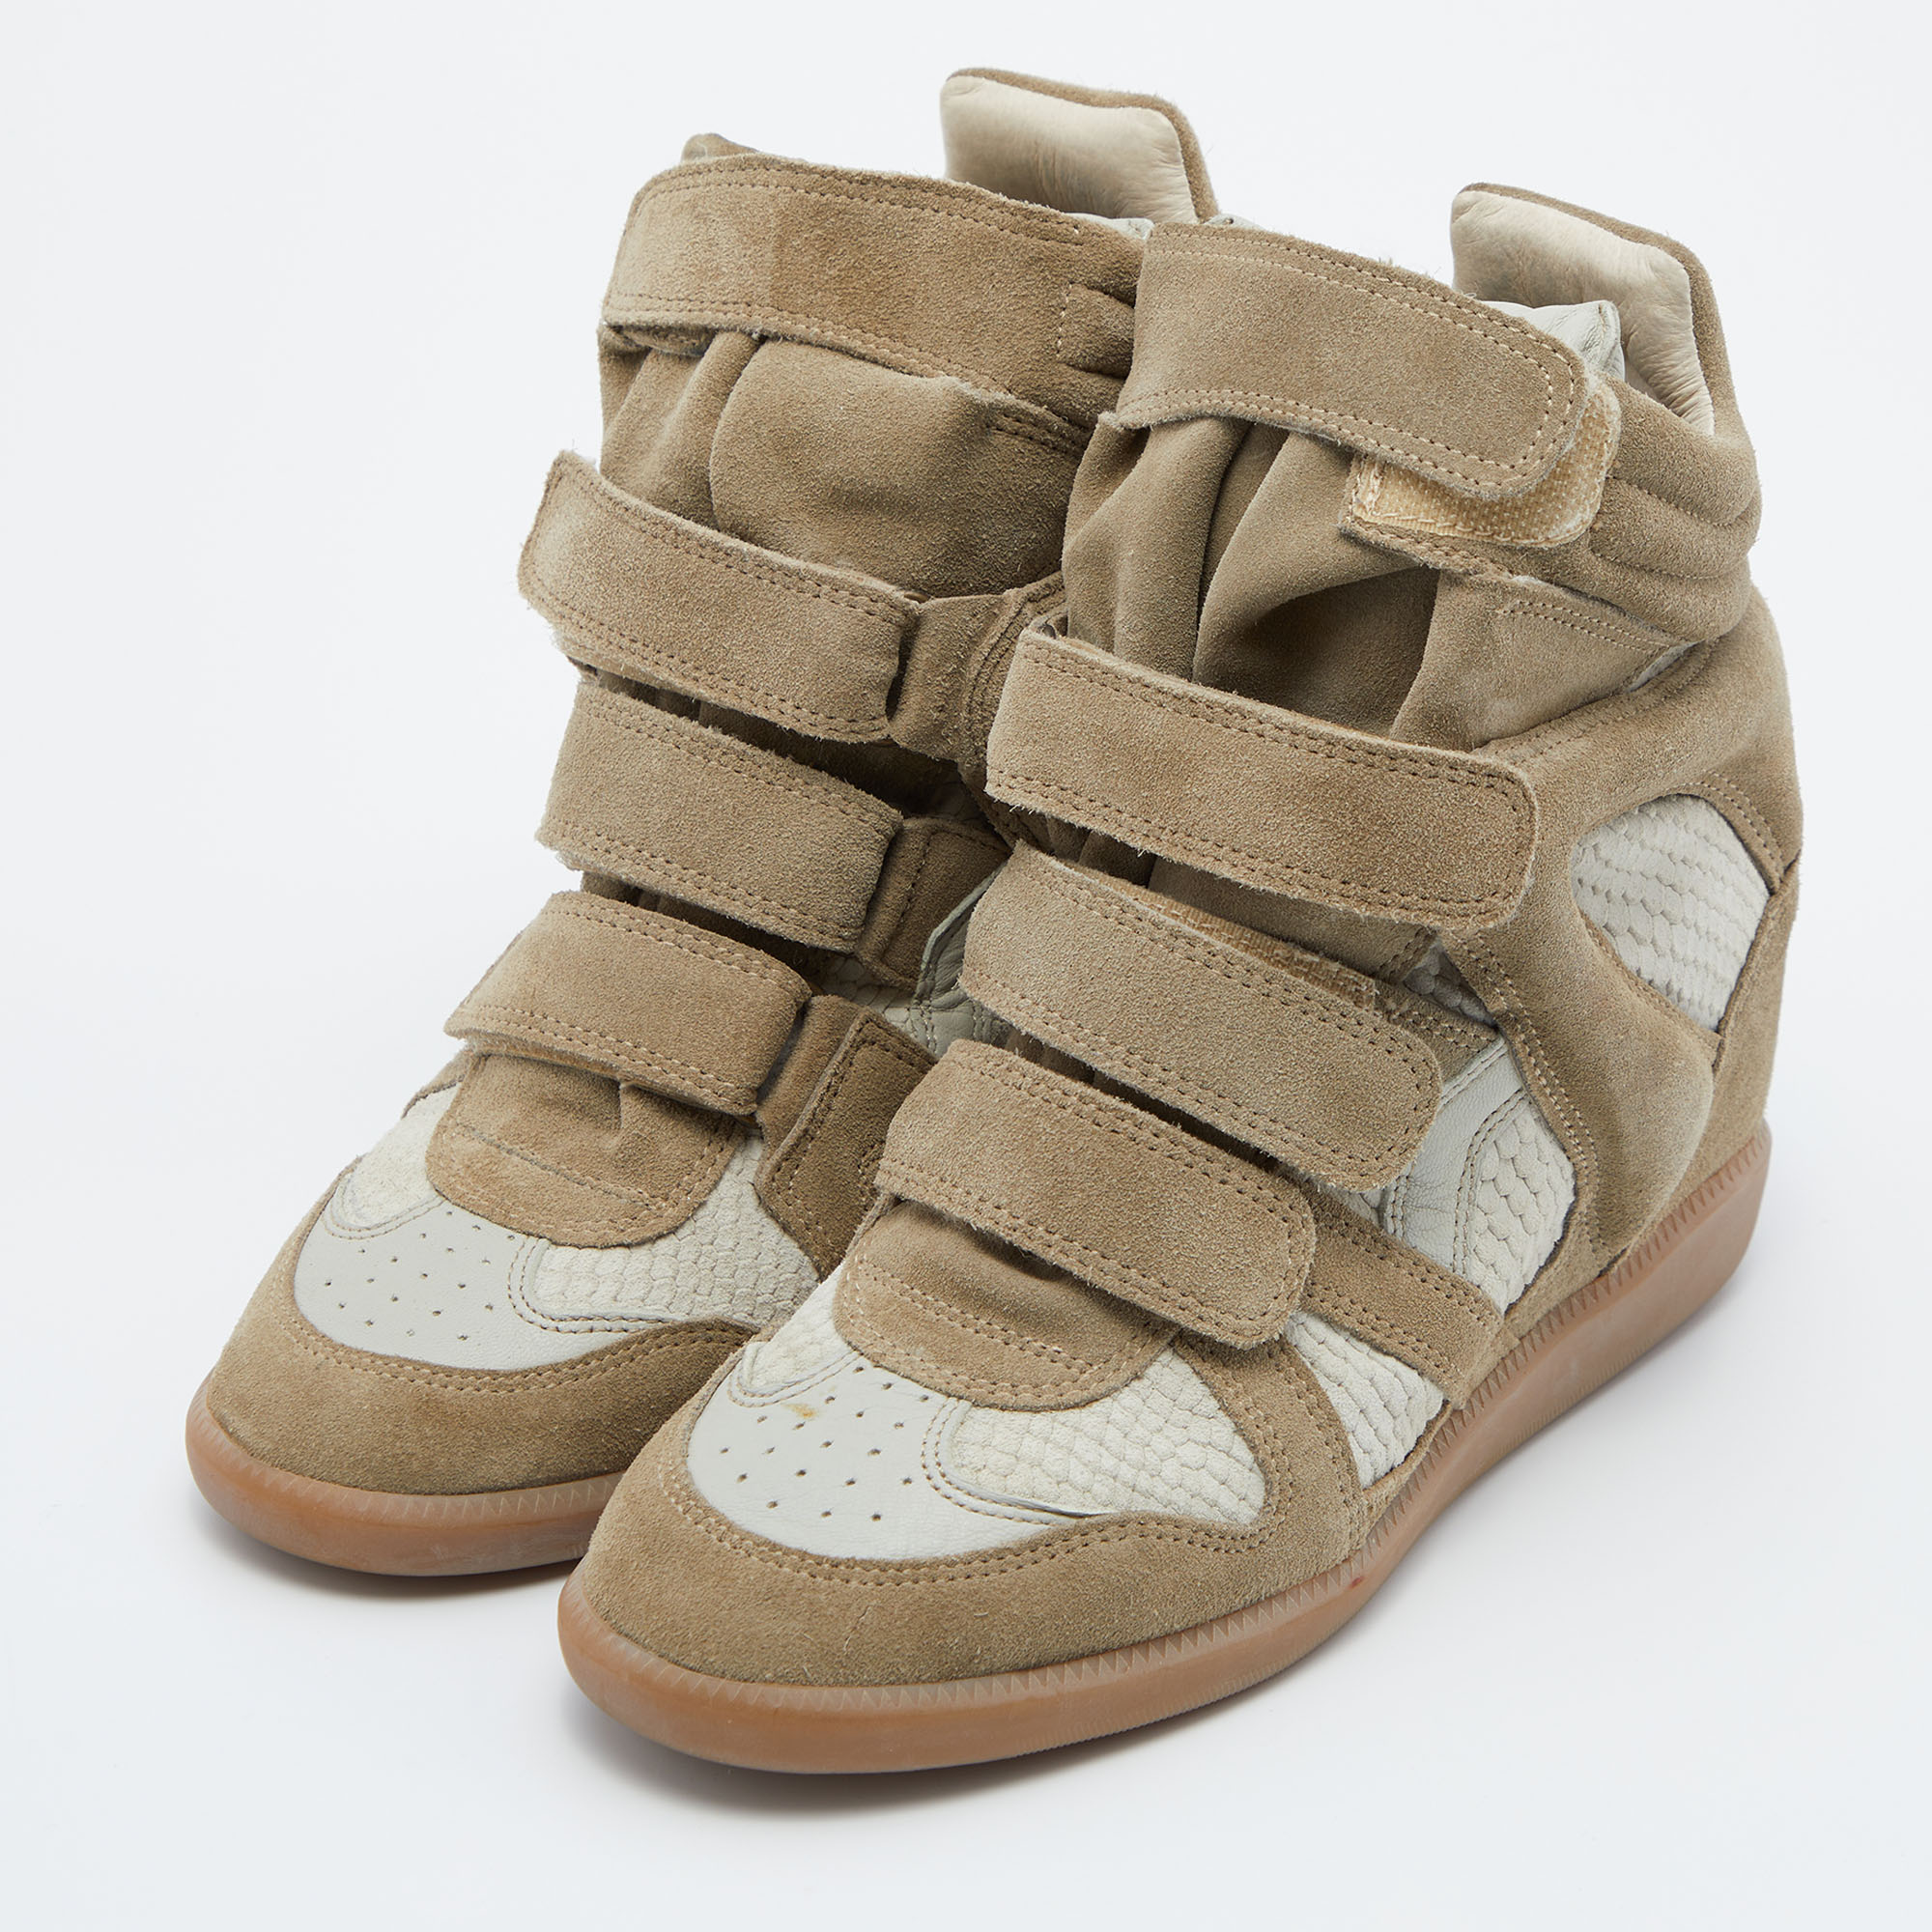 

Isabel Marant Beige Leather and Suede Bekett Wedge Sneakers Size